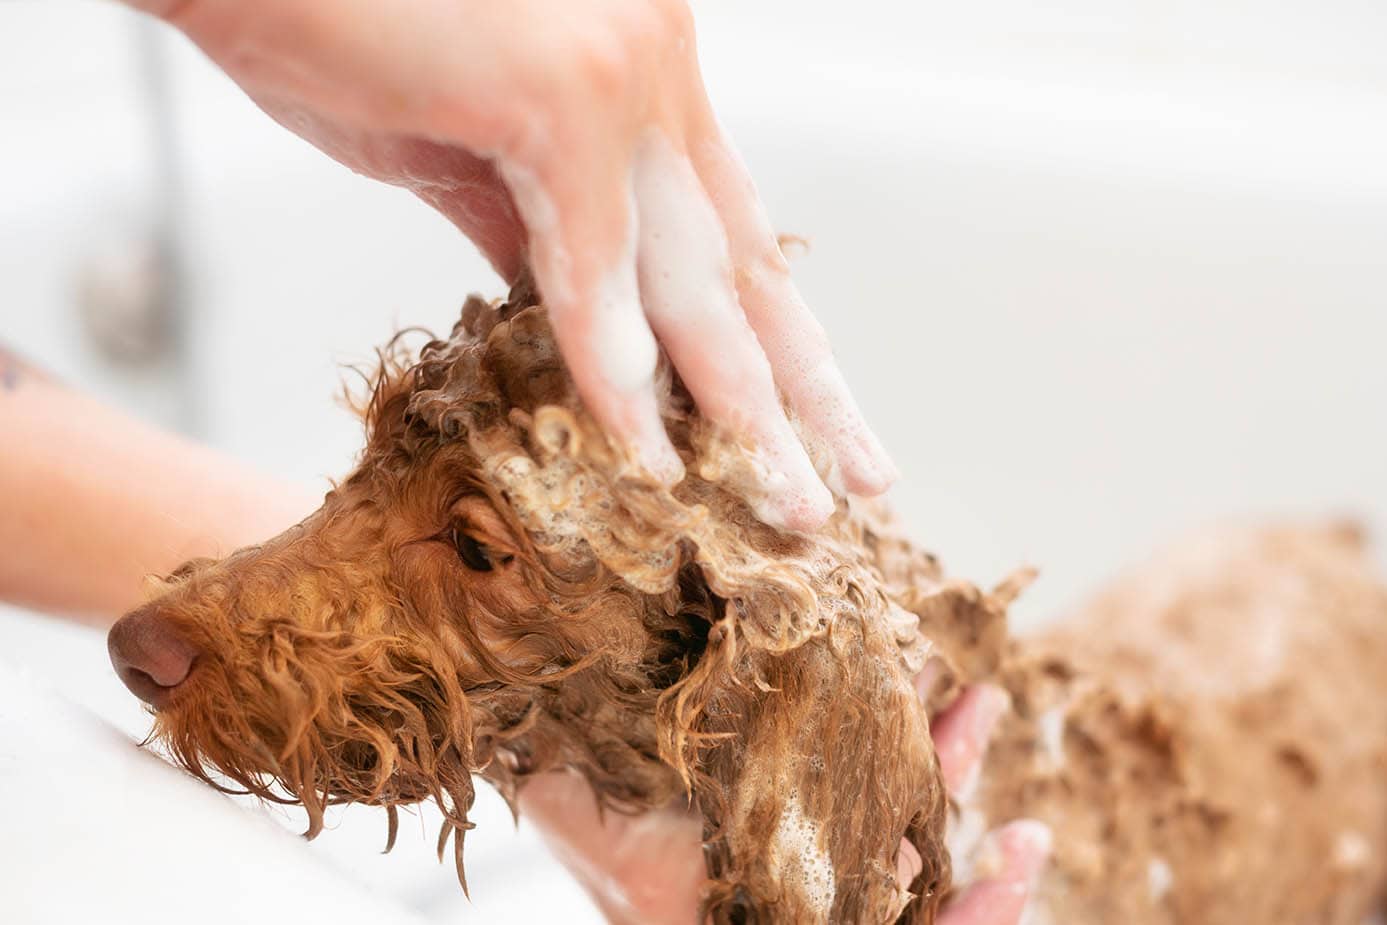 A person applying dog shampoo to a Poodle's coat